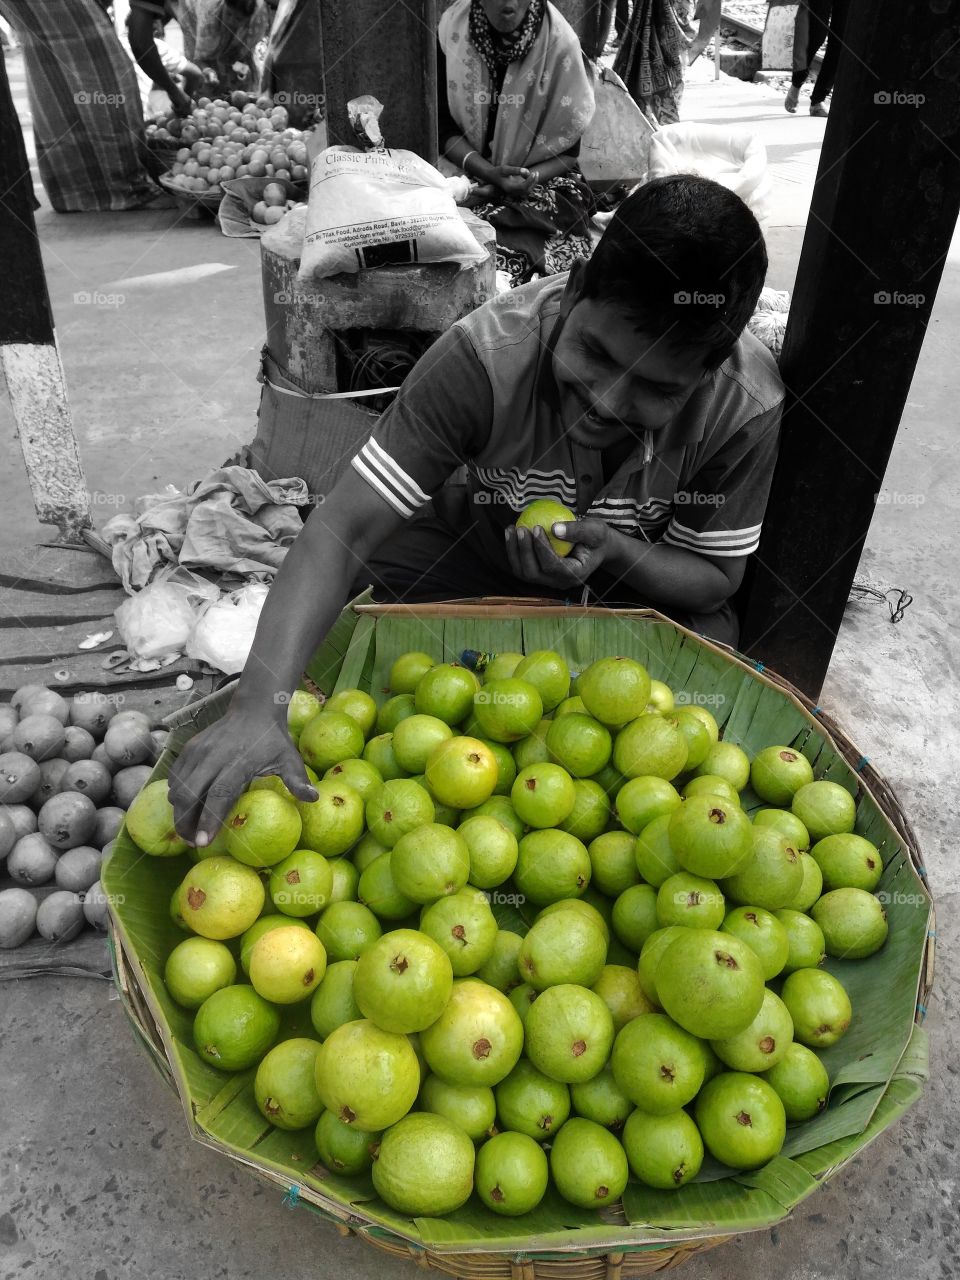 A guy selling guava